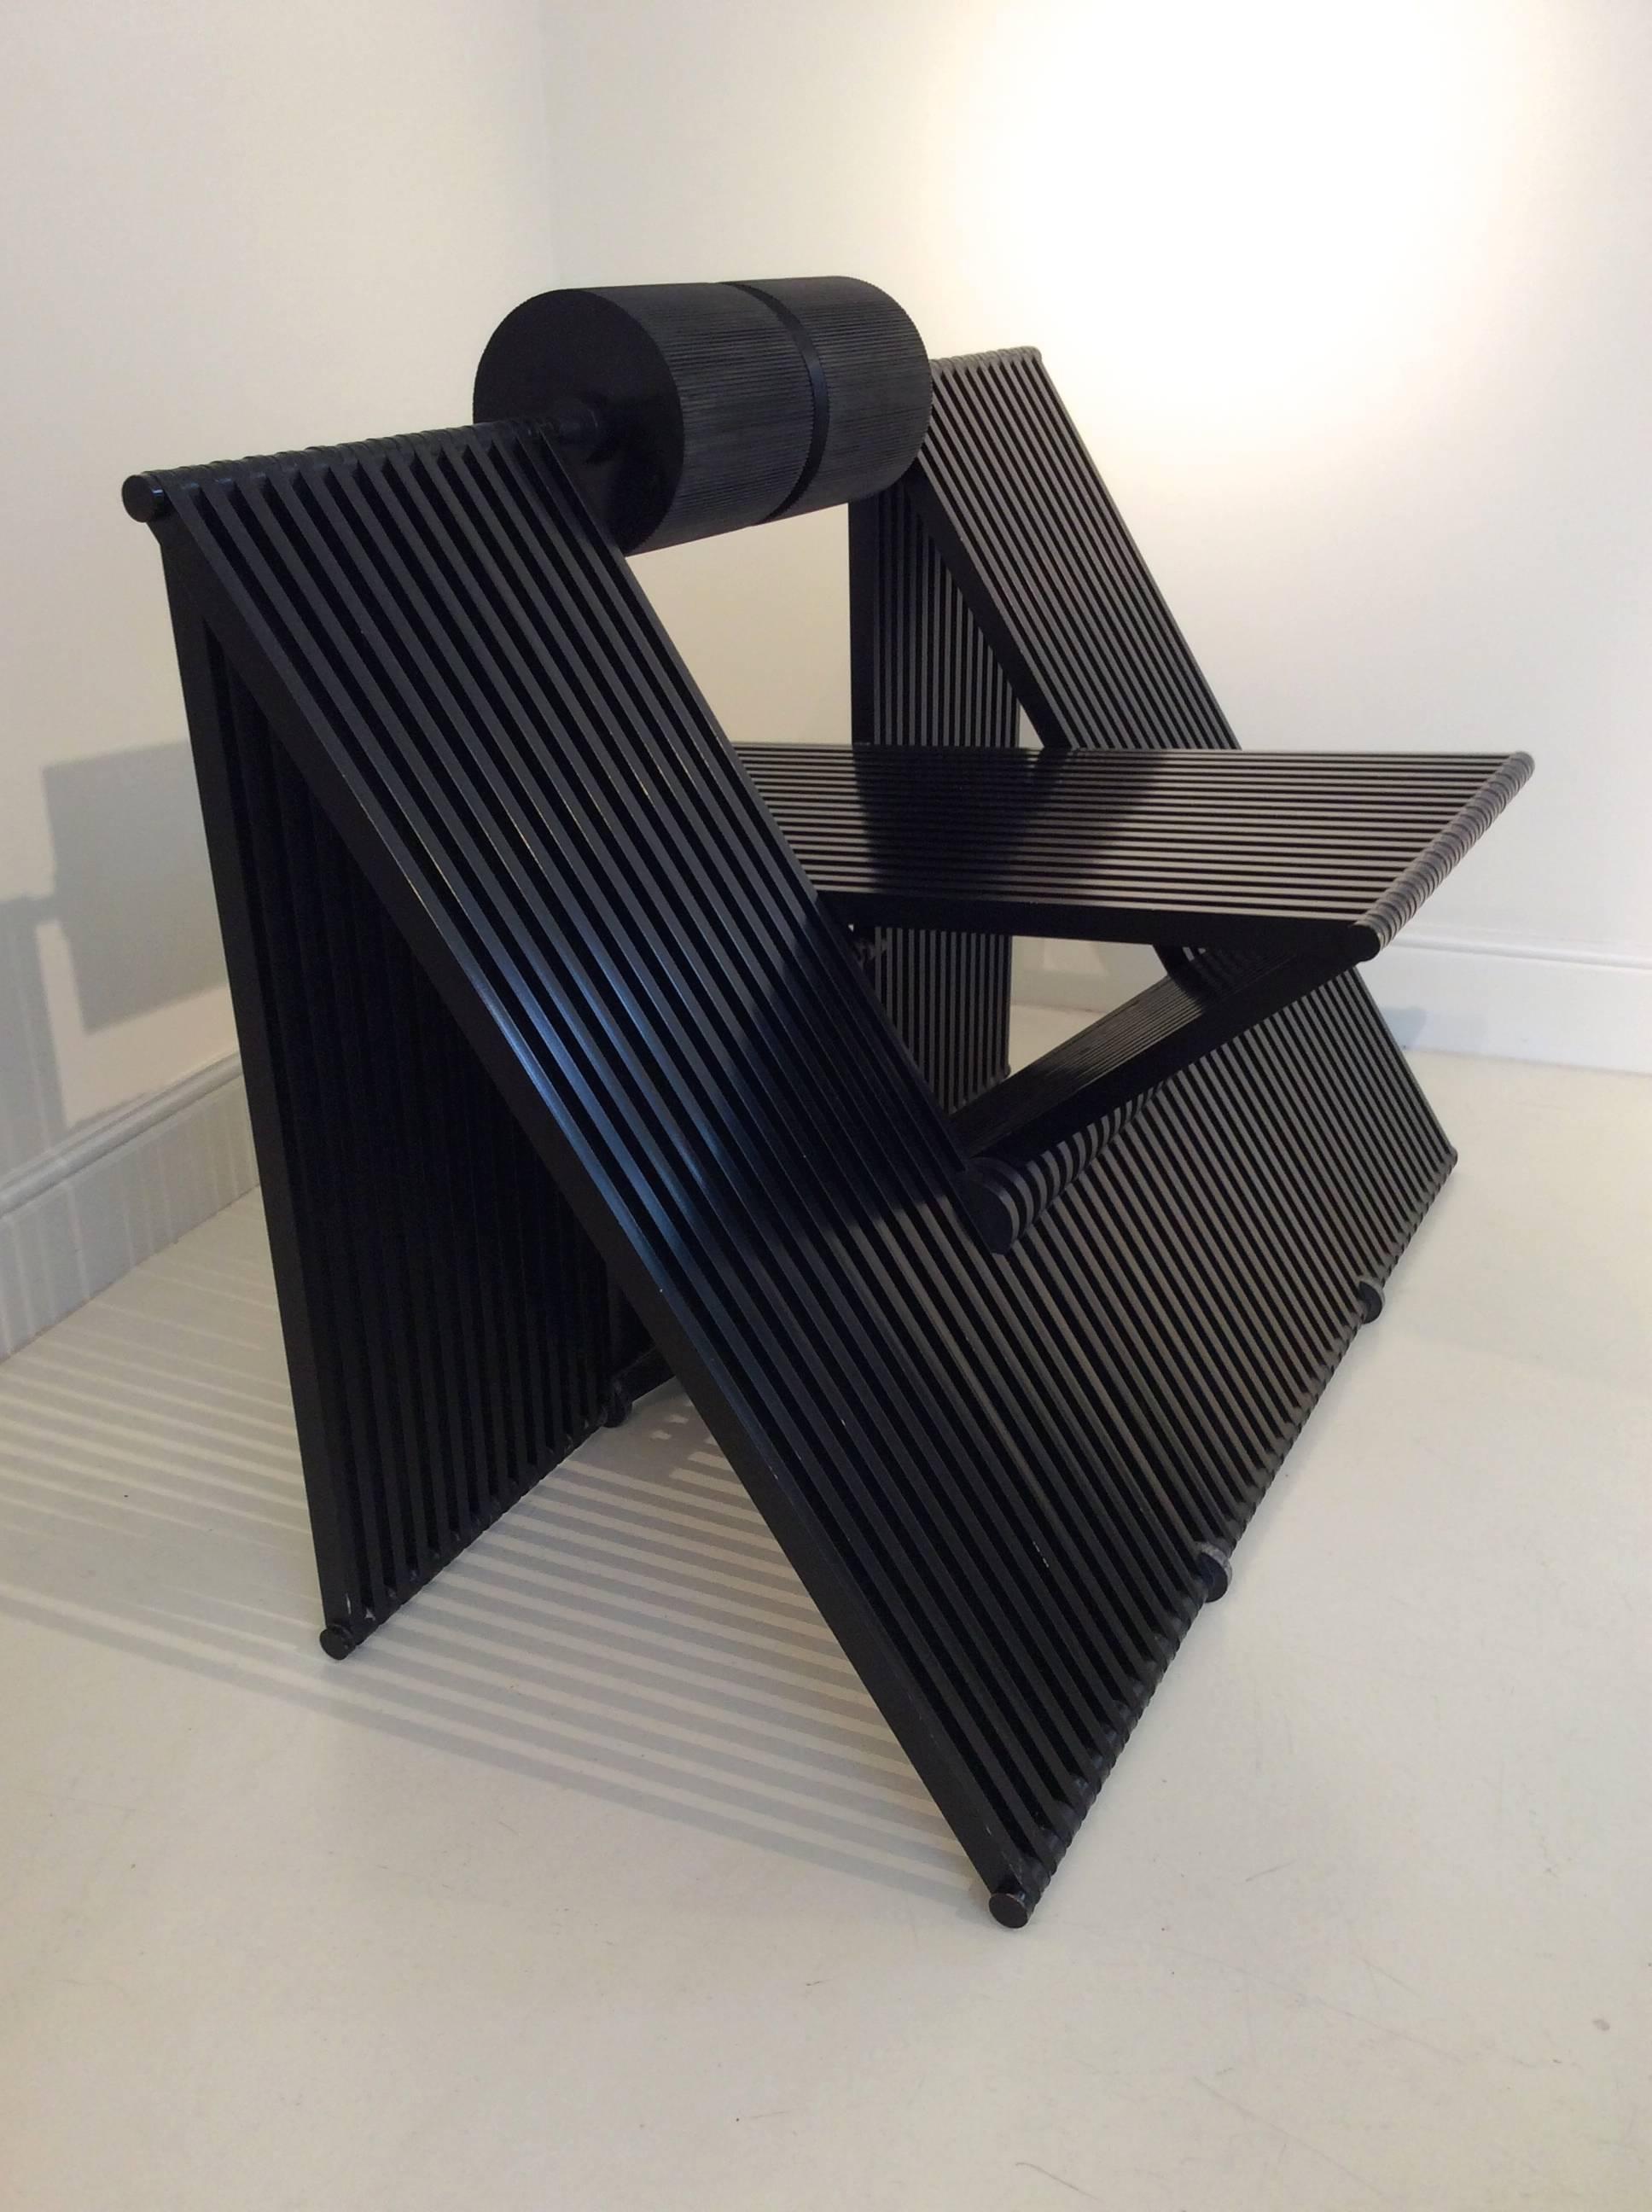 Sculptural Quarta chair by Mario Botta for Alias, 1984, Italy.
Black lacquered aluminium and back role from black polyurethane.
Measures: H: 67 cm, W: 98 cm, D: 65 cm.
Good condition.
Out of production.
We ship anywhere in the world, please feel